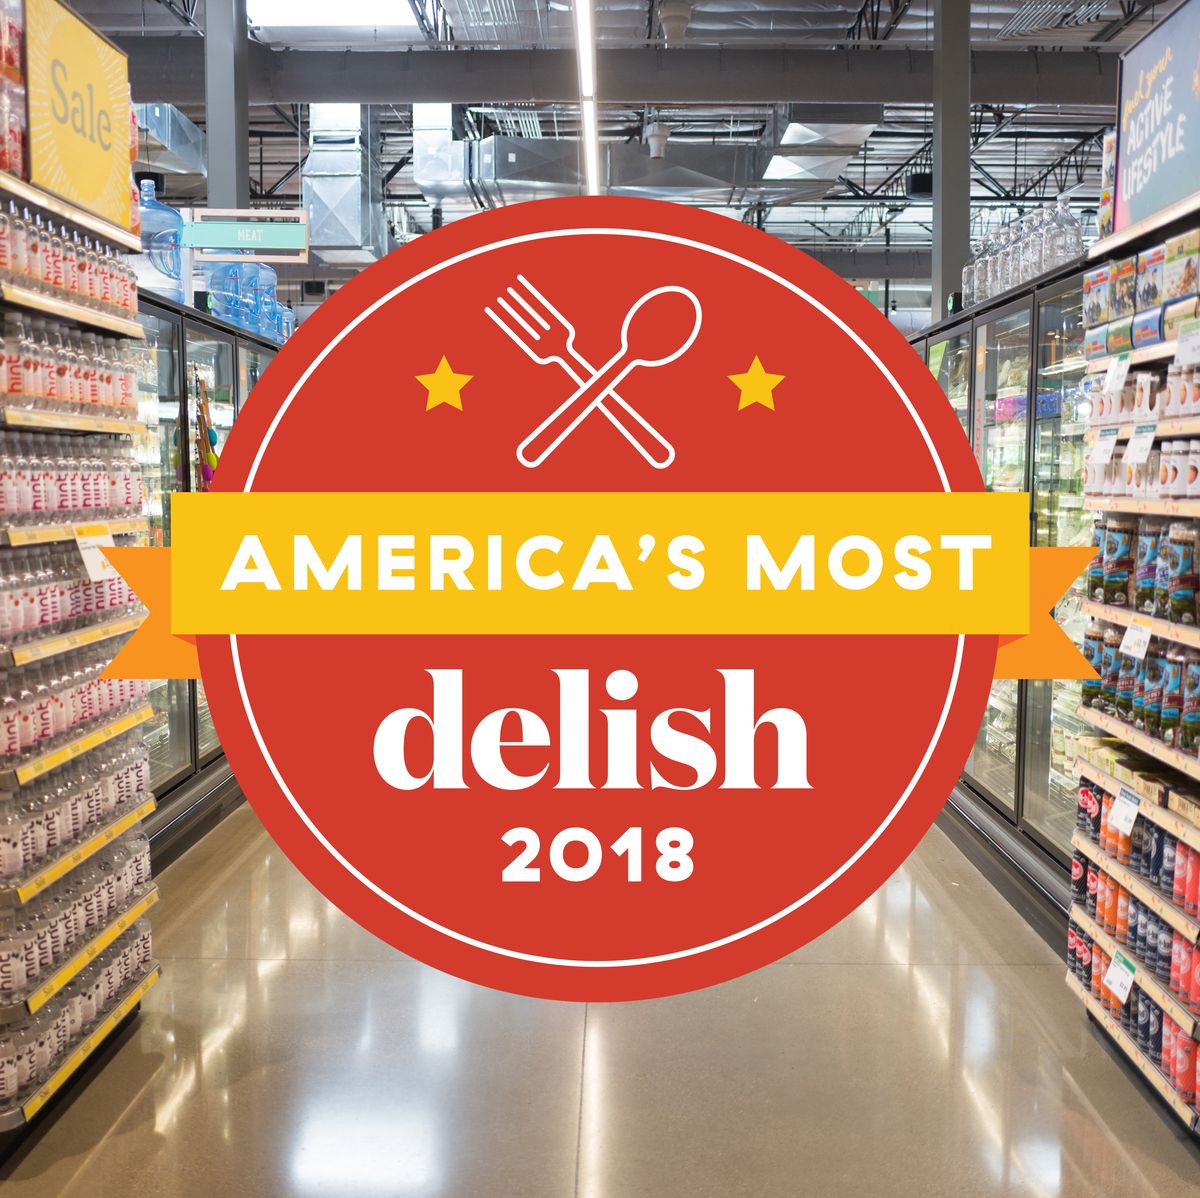 100 Best Grocery Items to Buy in 2018 - America's Most Delish